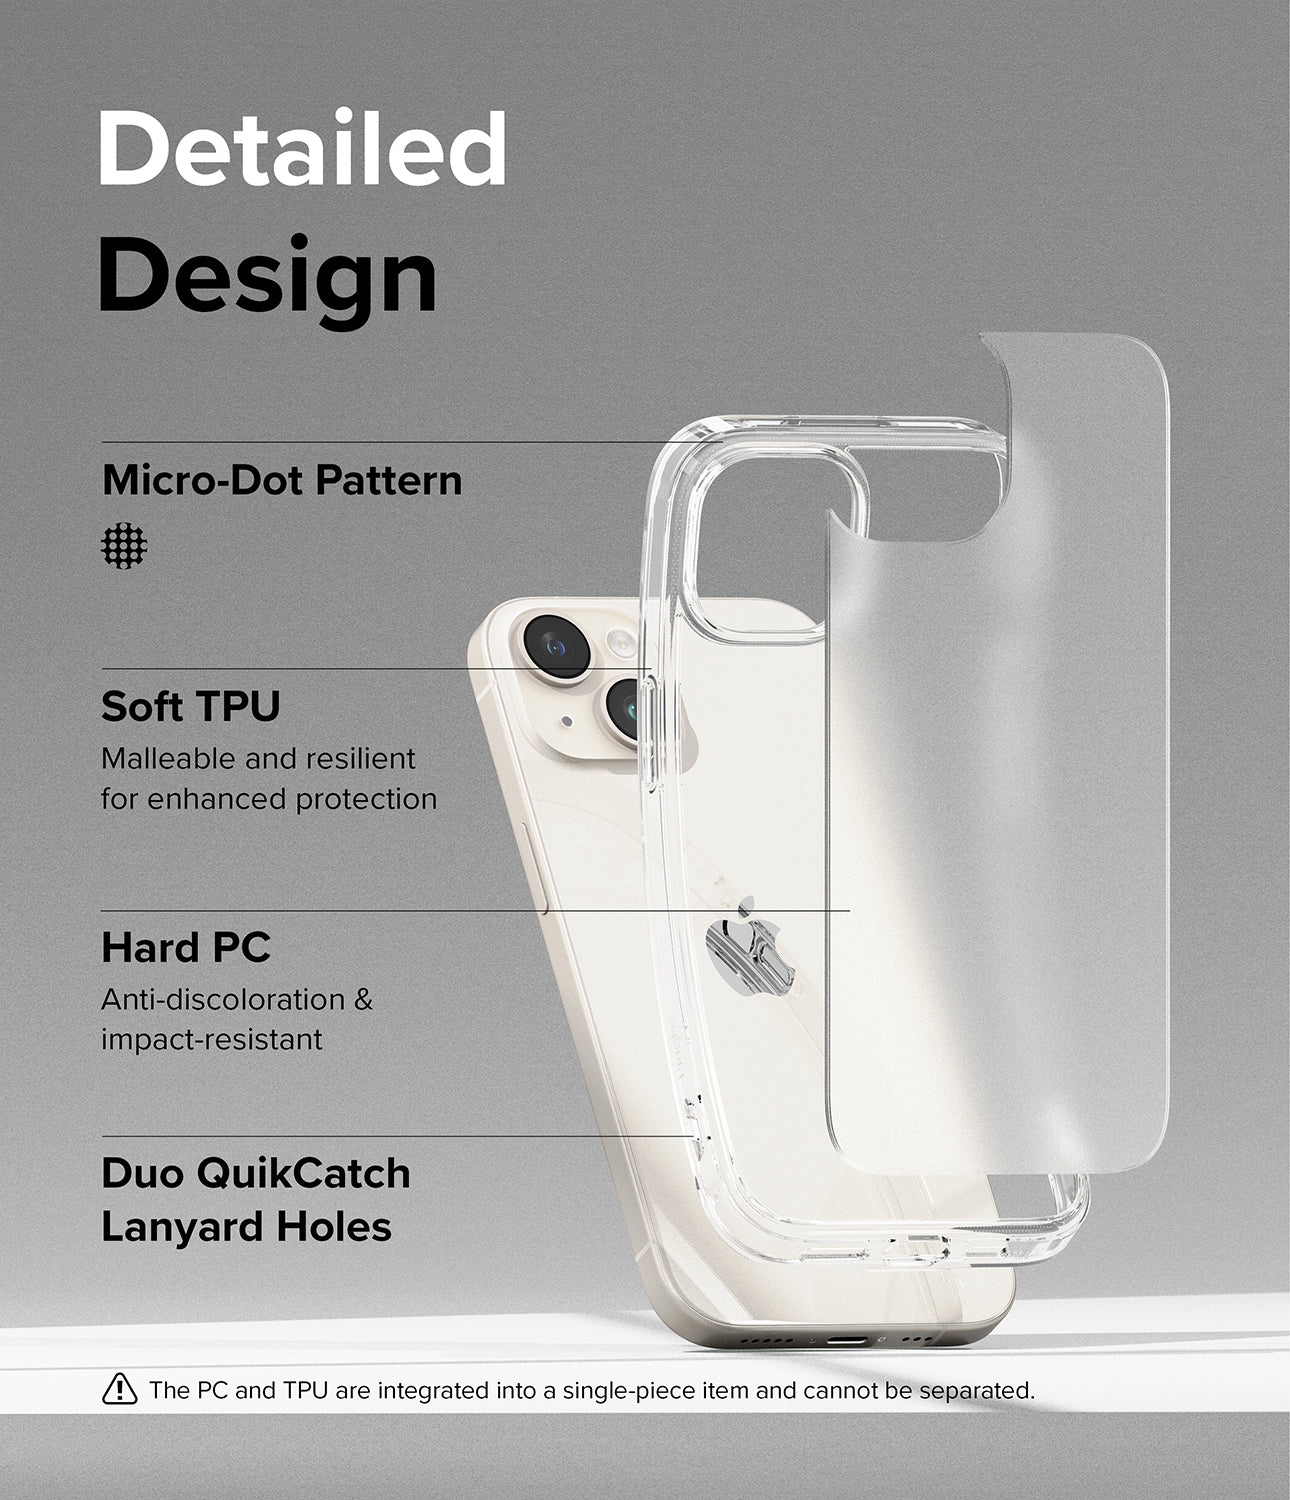 iPhone 15 Plus Case | Fusion - Matte Clear - Detailed Design. Micro-Dot Pattern. Malleable and resilient for enhanced protection with Soft TPU. Anti-discoloration and impact-resistant with Hard PC. Duo QuikCatch Lanyard Holes.